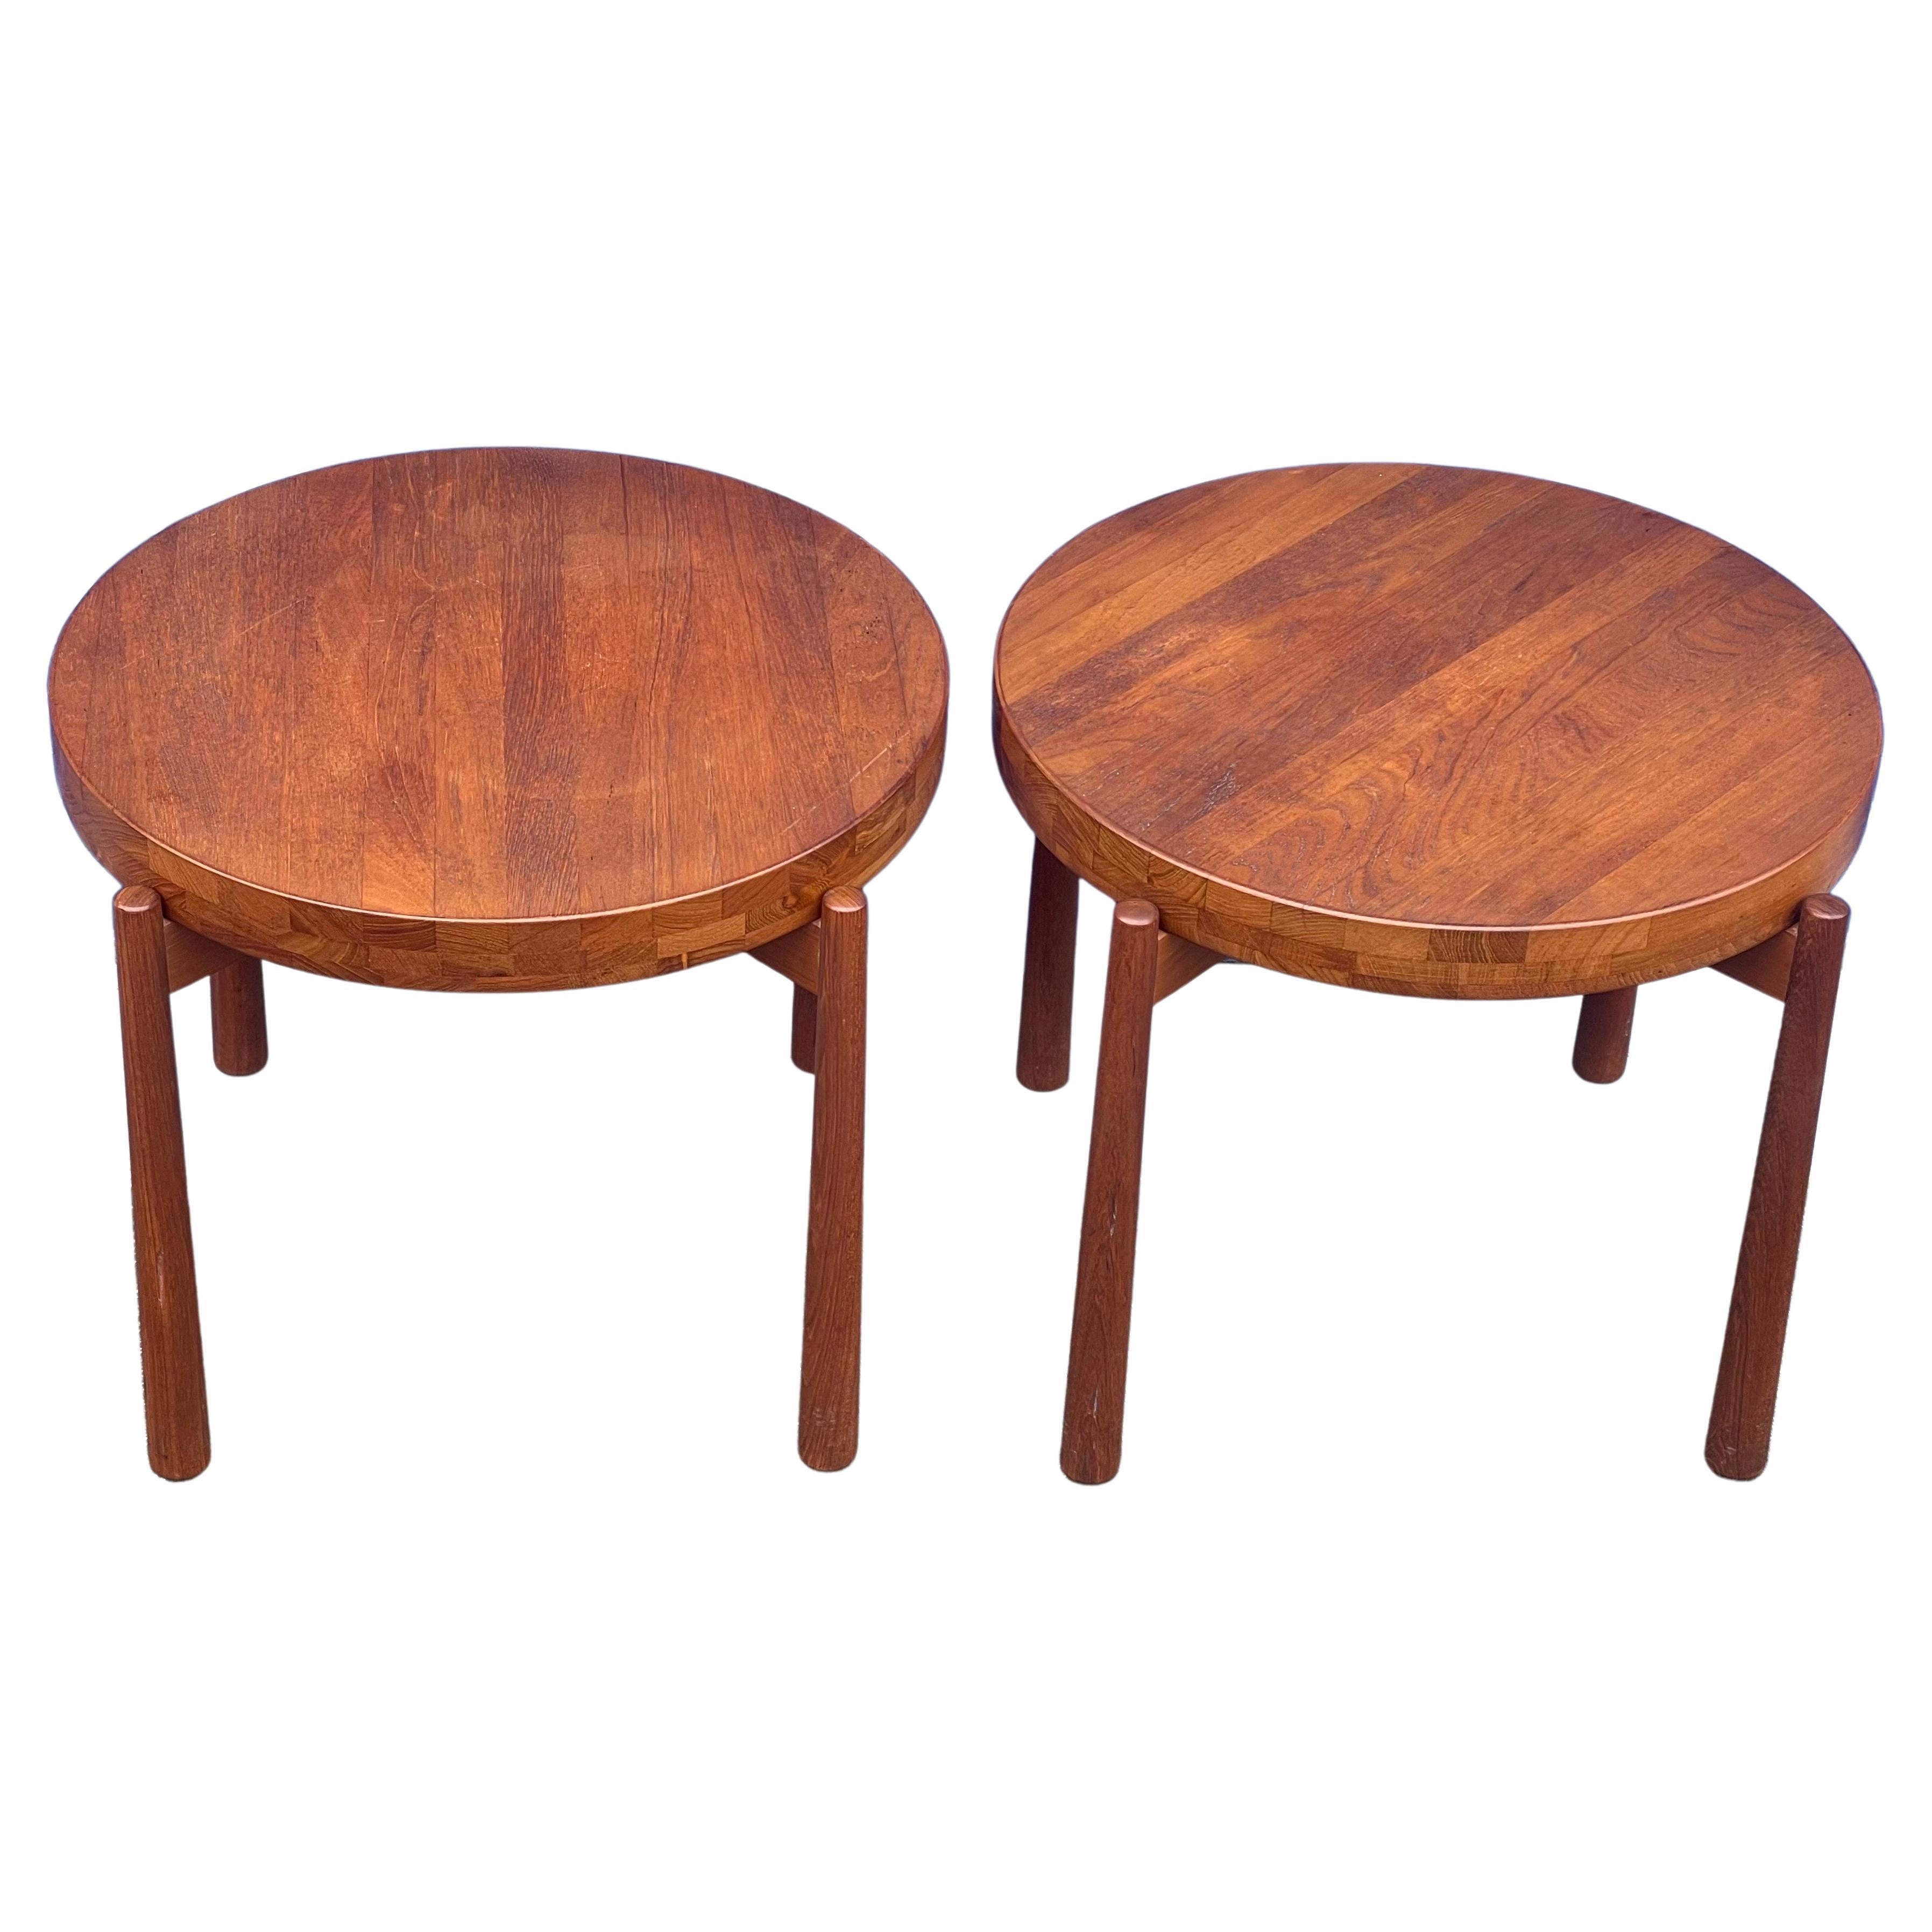 Mid-Century Modern Pair of Teak Tray Side Tables Attributed to Jens Quistgaard for DUX of Sweden For Sale